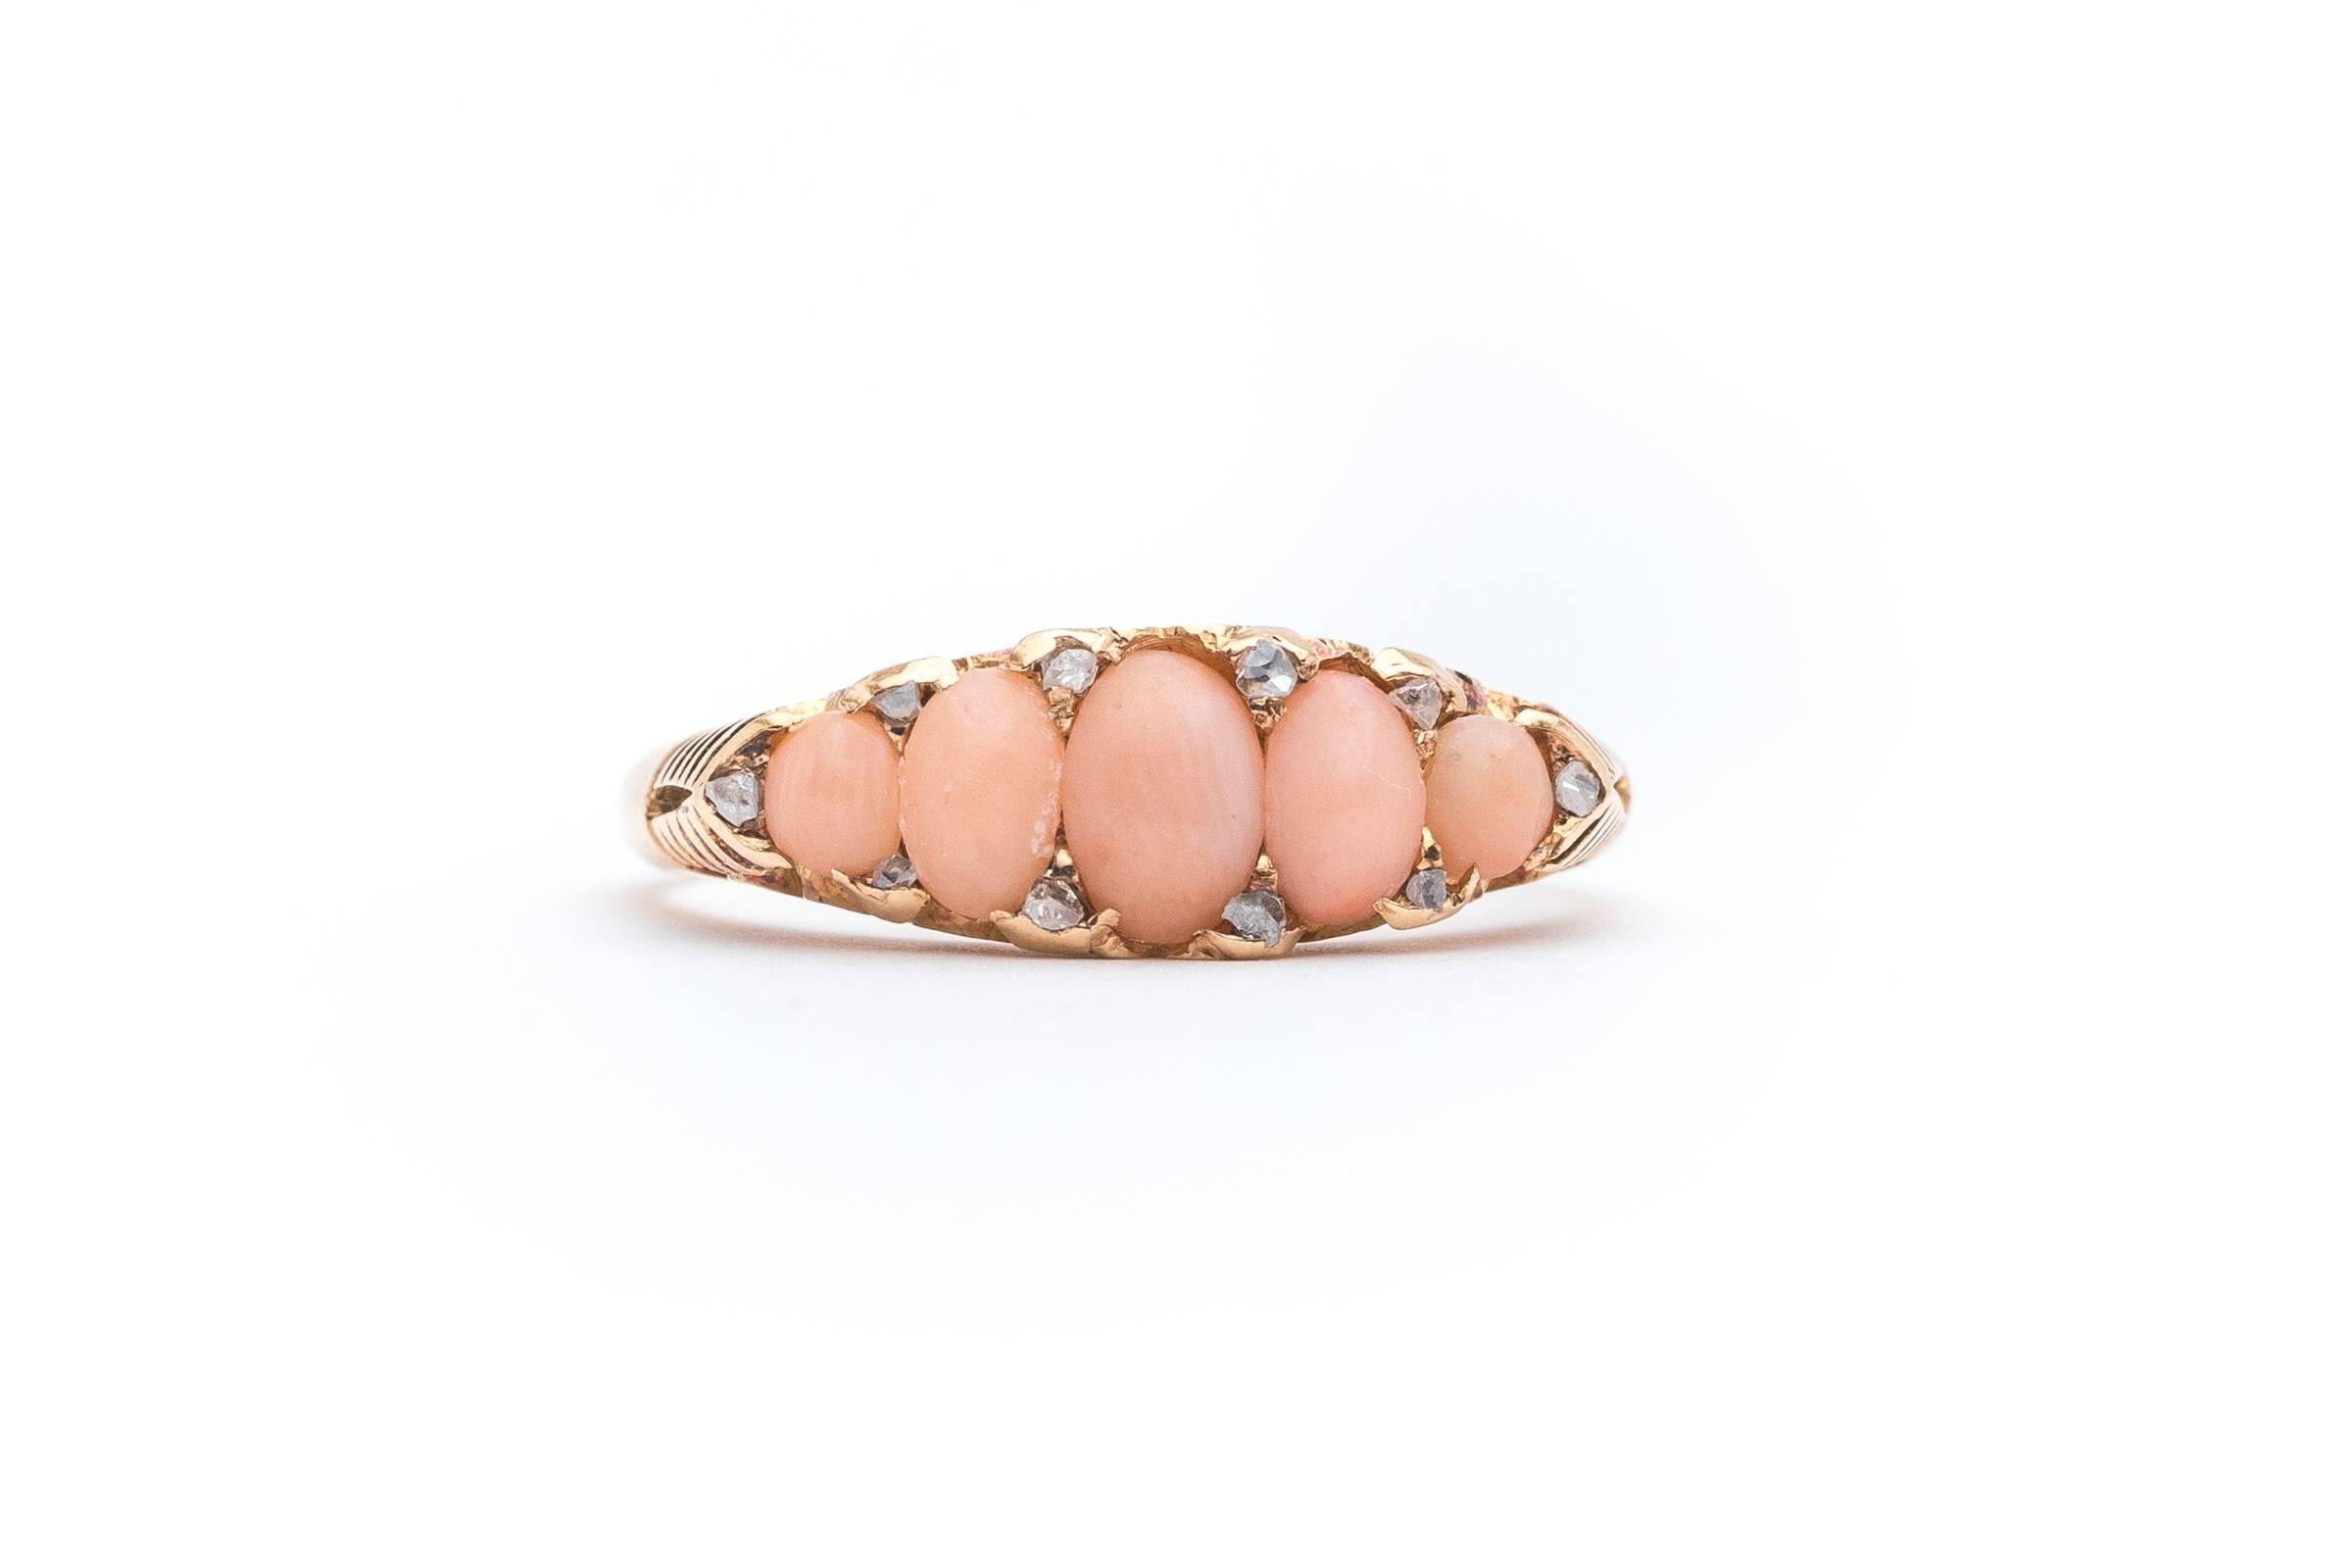 Beacon Hill Jewelers Presents:

An original victorian period English made coral and rose cut diamond ring in rich 18 karat yellow gold. Centered by five cabochon cut angel-skin cool of tapered size, this ring is accented by a total of ten petite